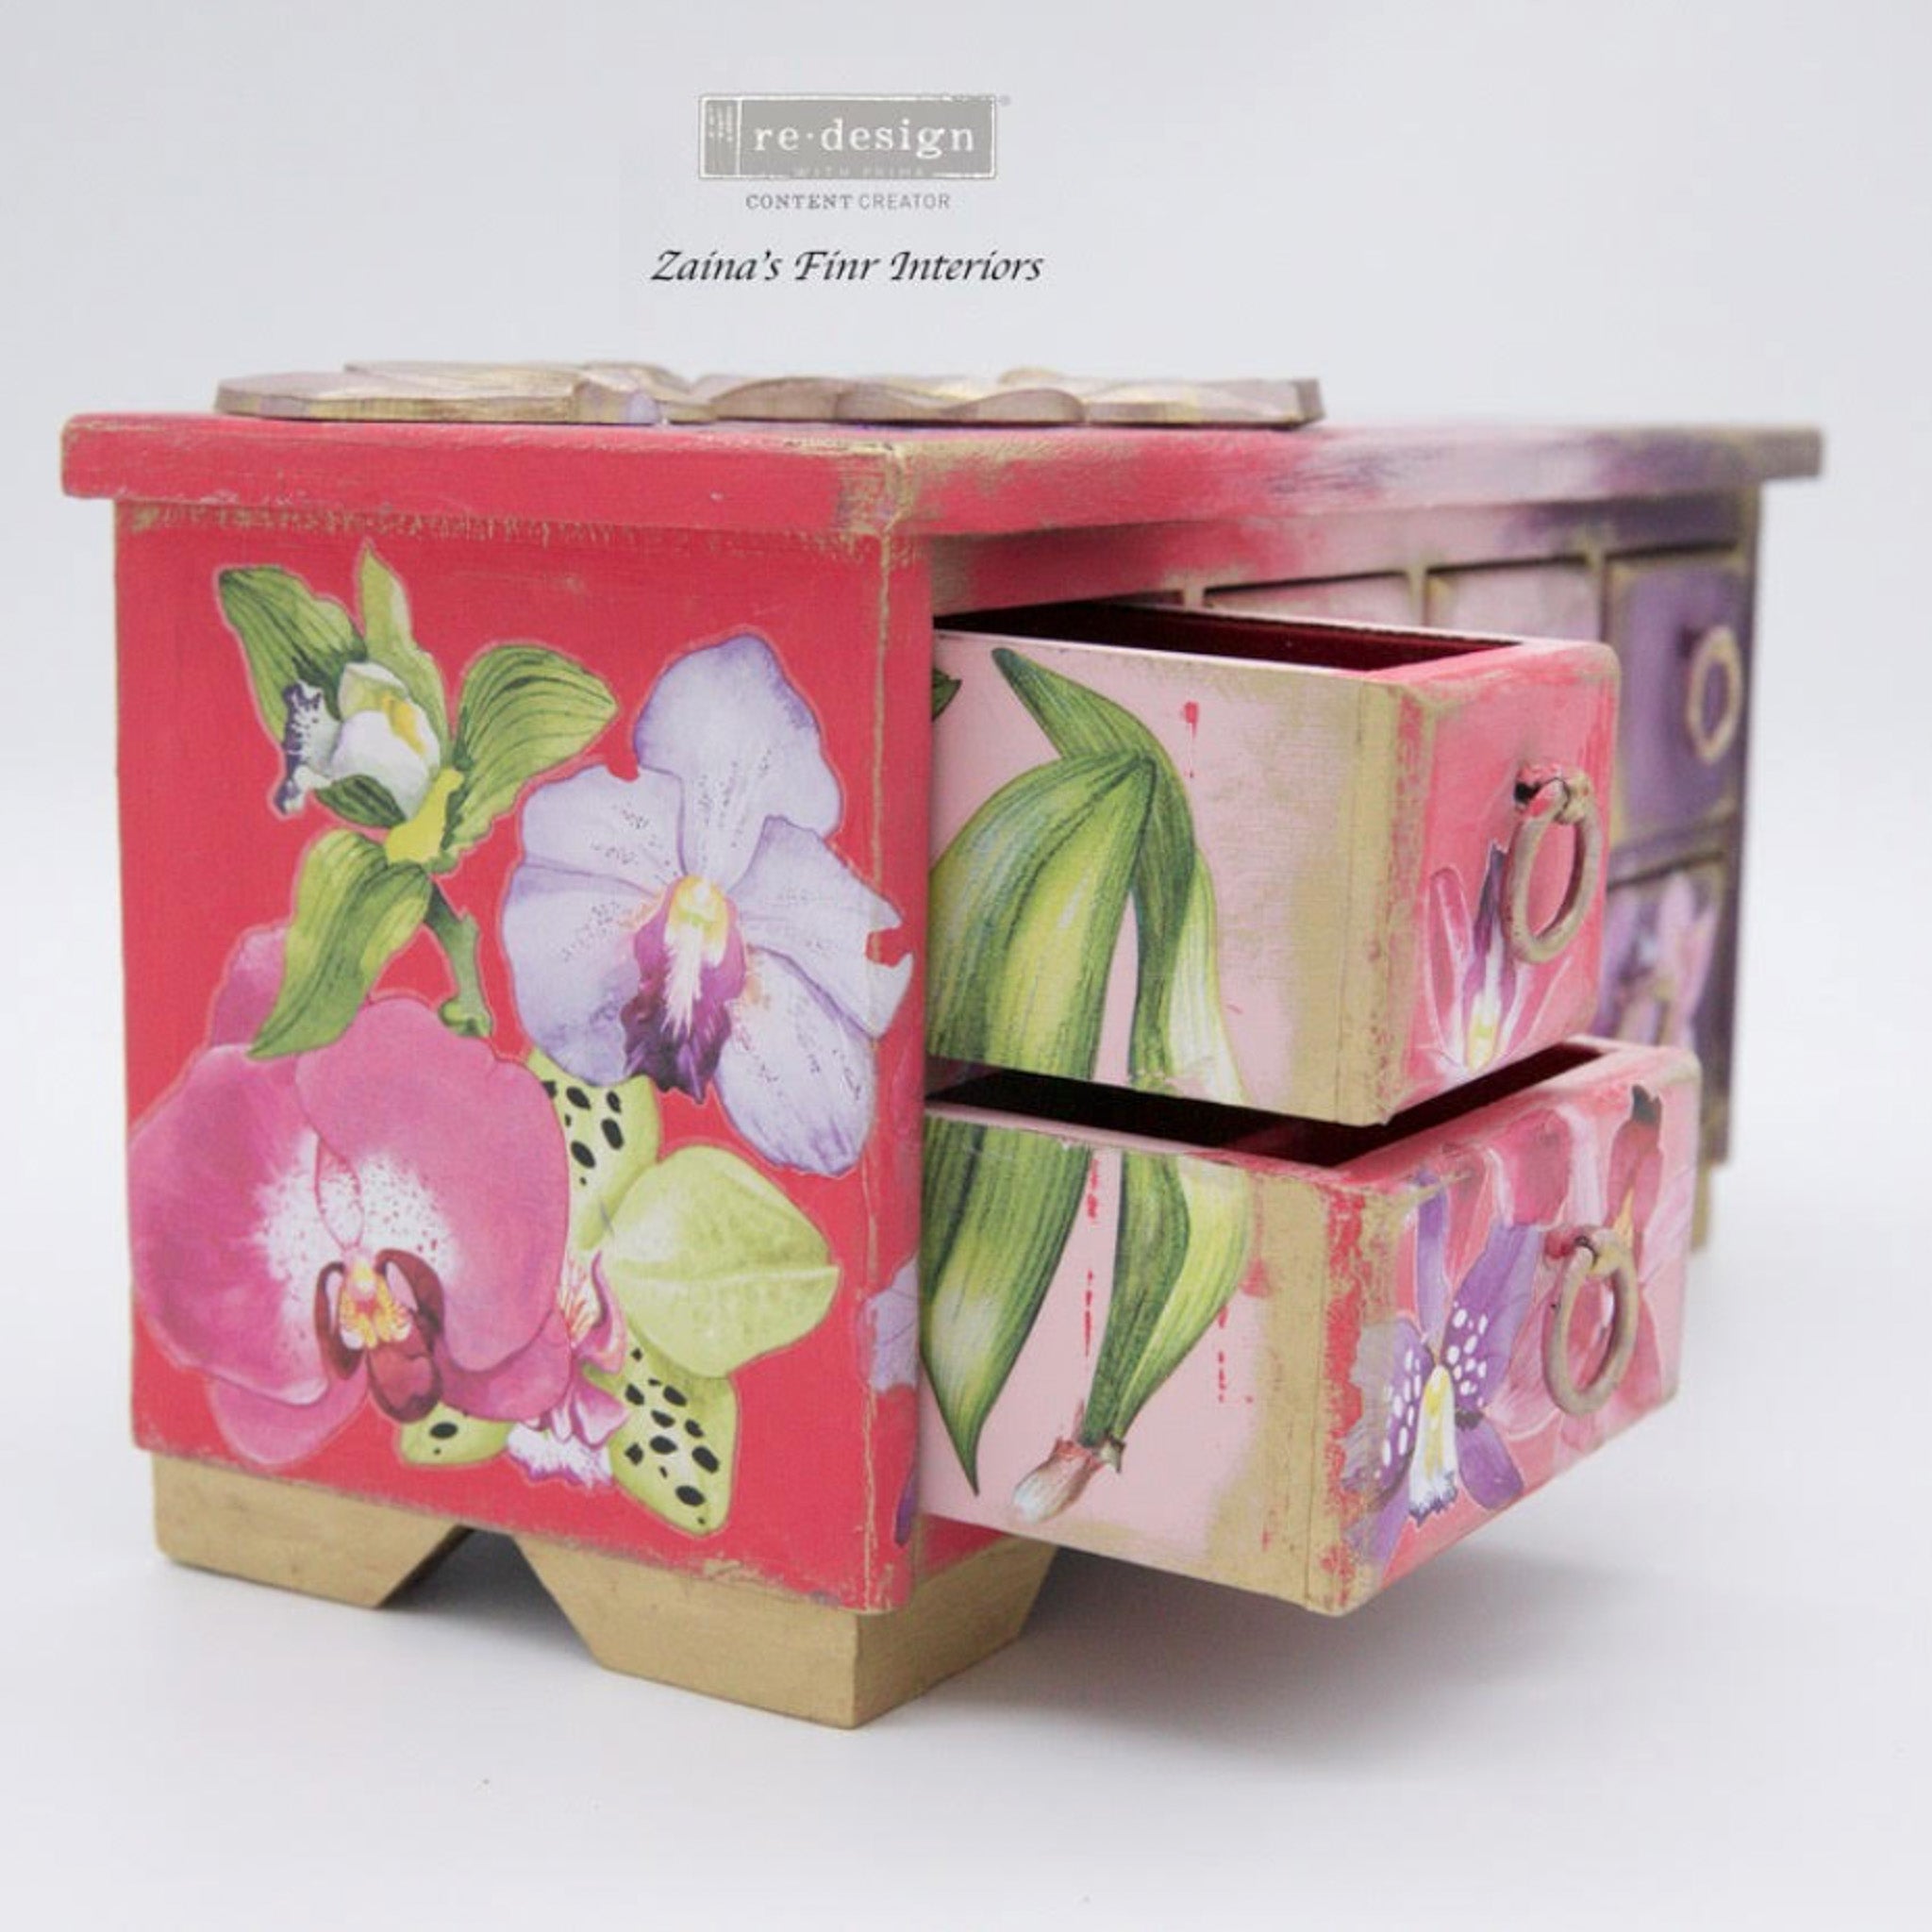 A small jewely box with drawers refurbished by Zaina's Fine Interiors is painted an ombre of coral prink to purple and features ReDesign with Prima's Sunset Tropics small transfer on it.